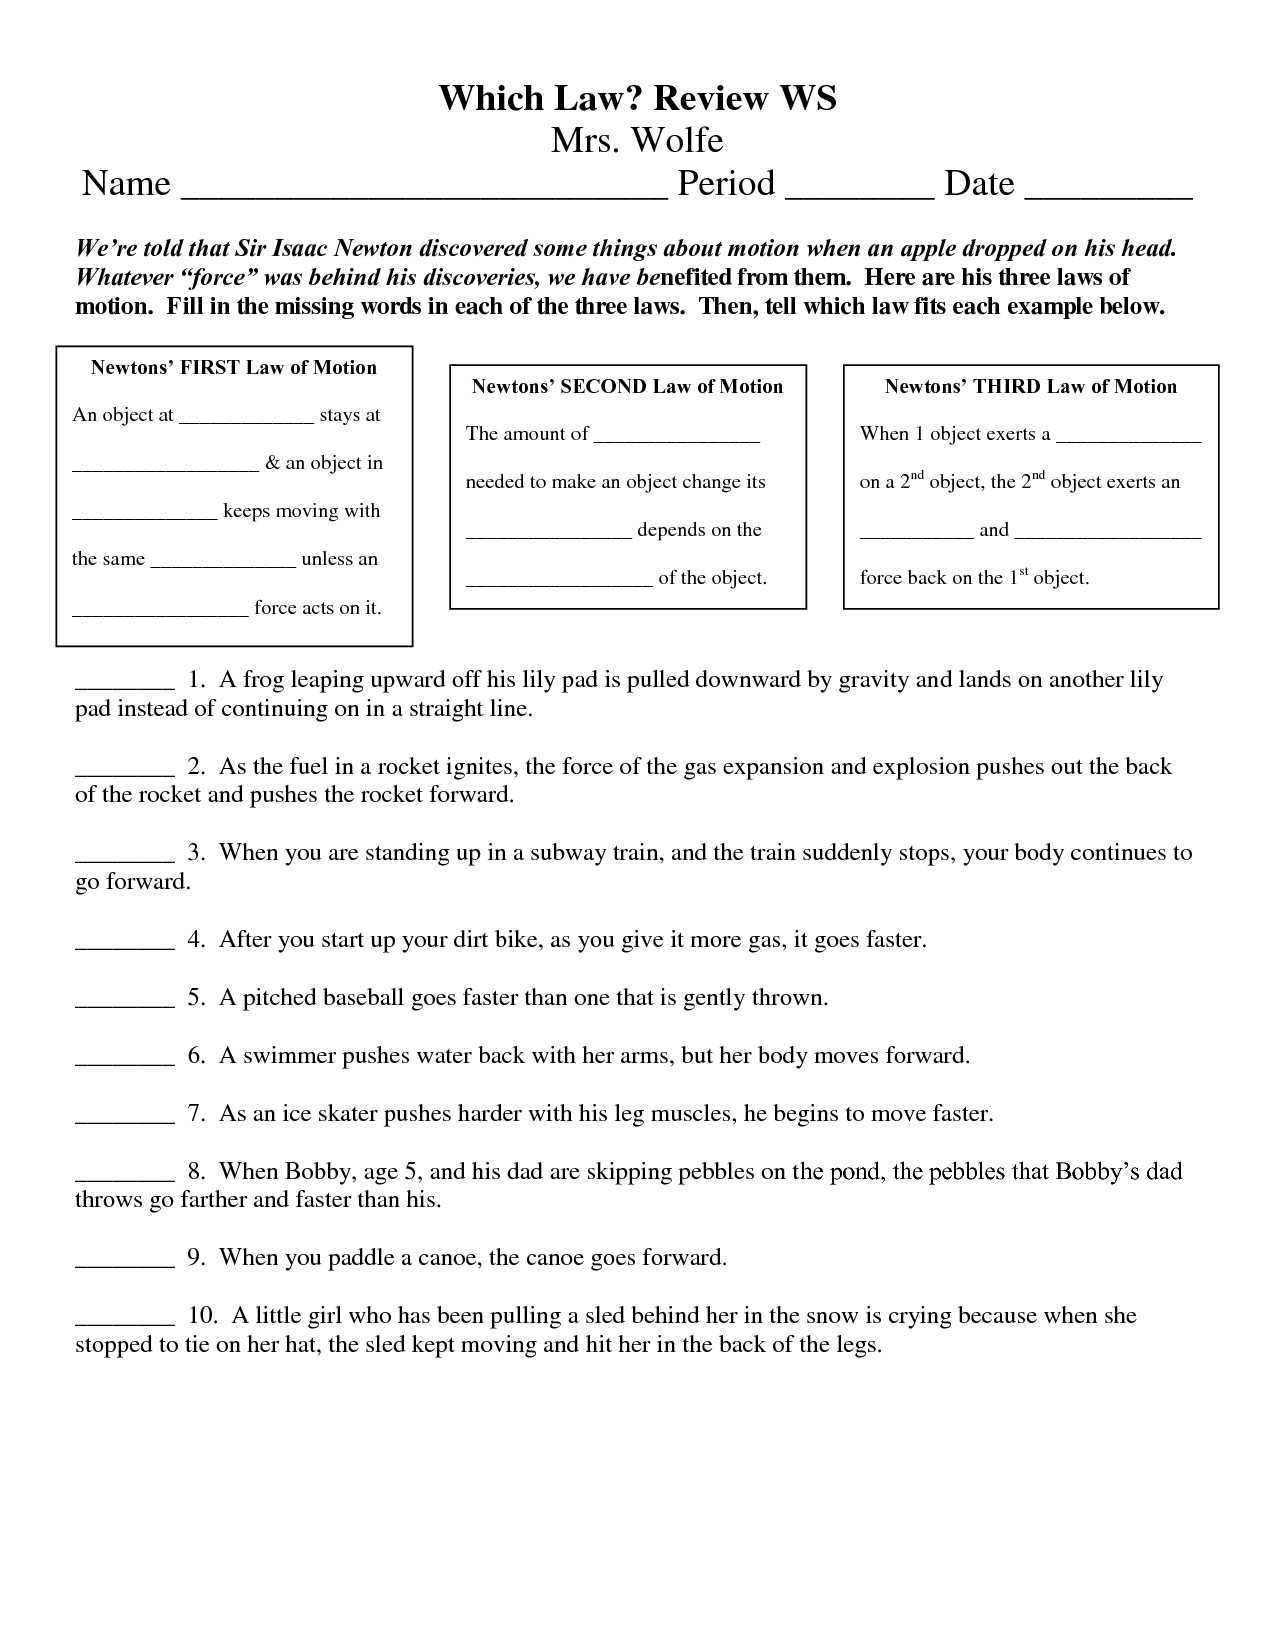 Two Way Frequency Table Worksheet Along with 3 Laws Of Motion Worksheets